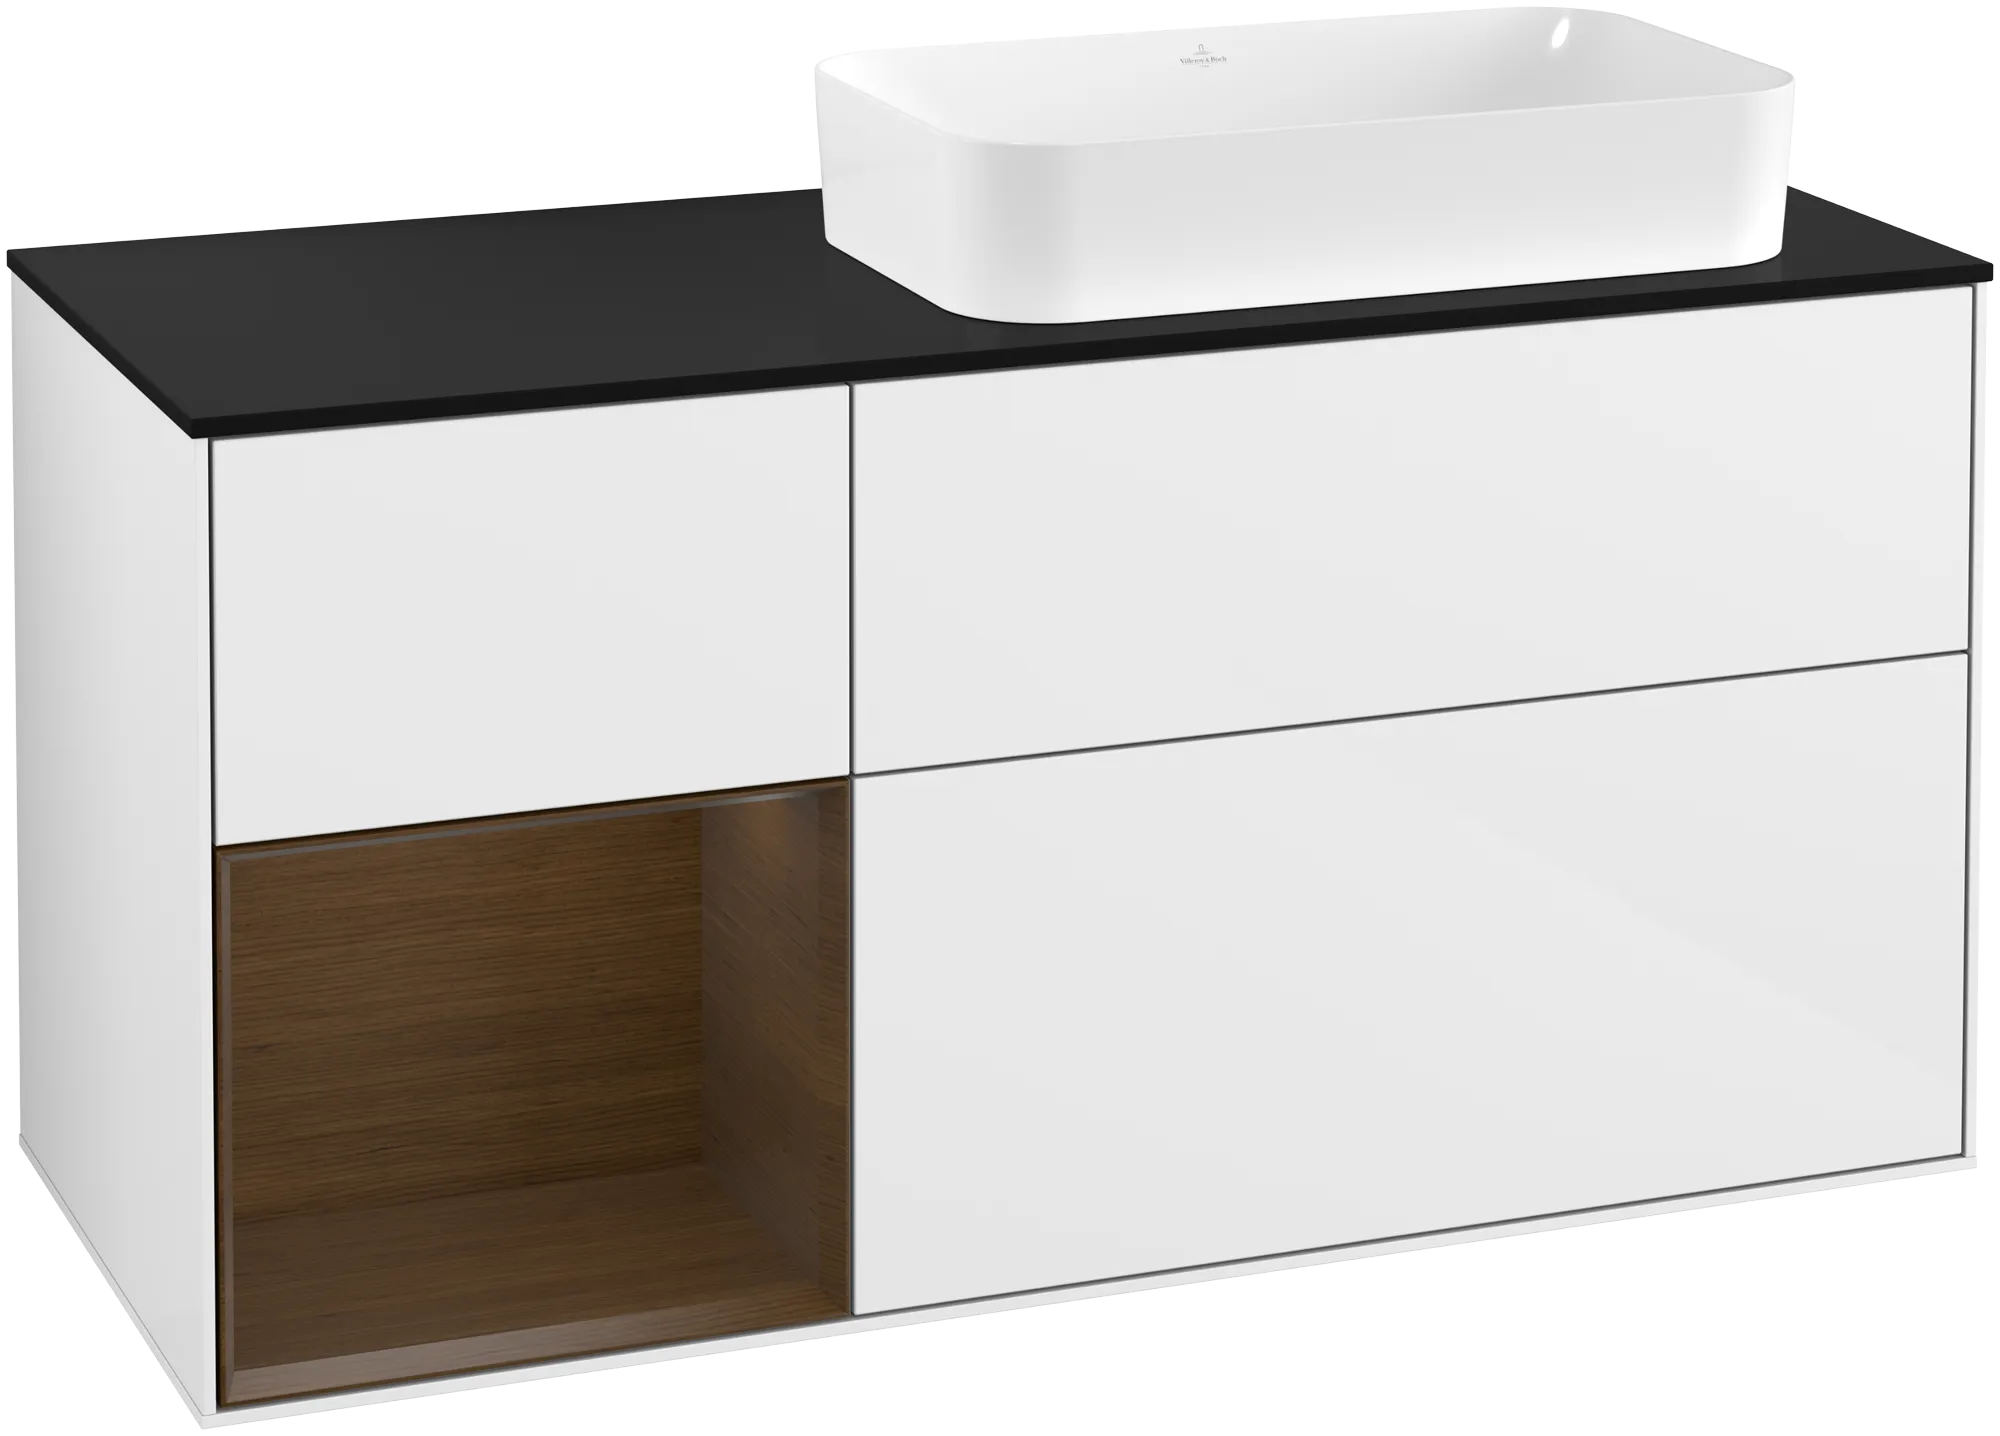 Picture of VILLEROY BOCH Finion Vanity unit, with lighting, 3 pull-out compartments, 1200 x 603 x 501 mm, Glossy White Lacquer / Walnut Veneer / Glass Black Matt #G272GNGF